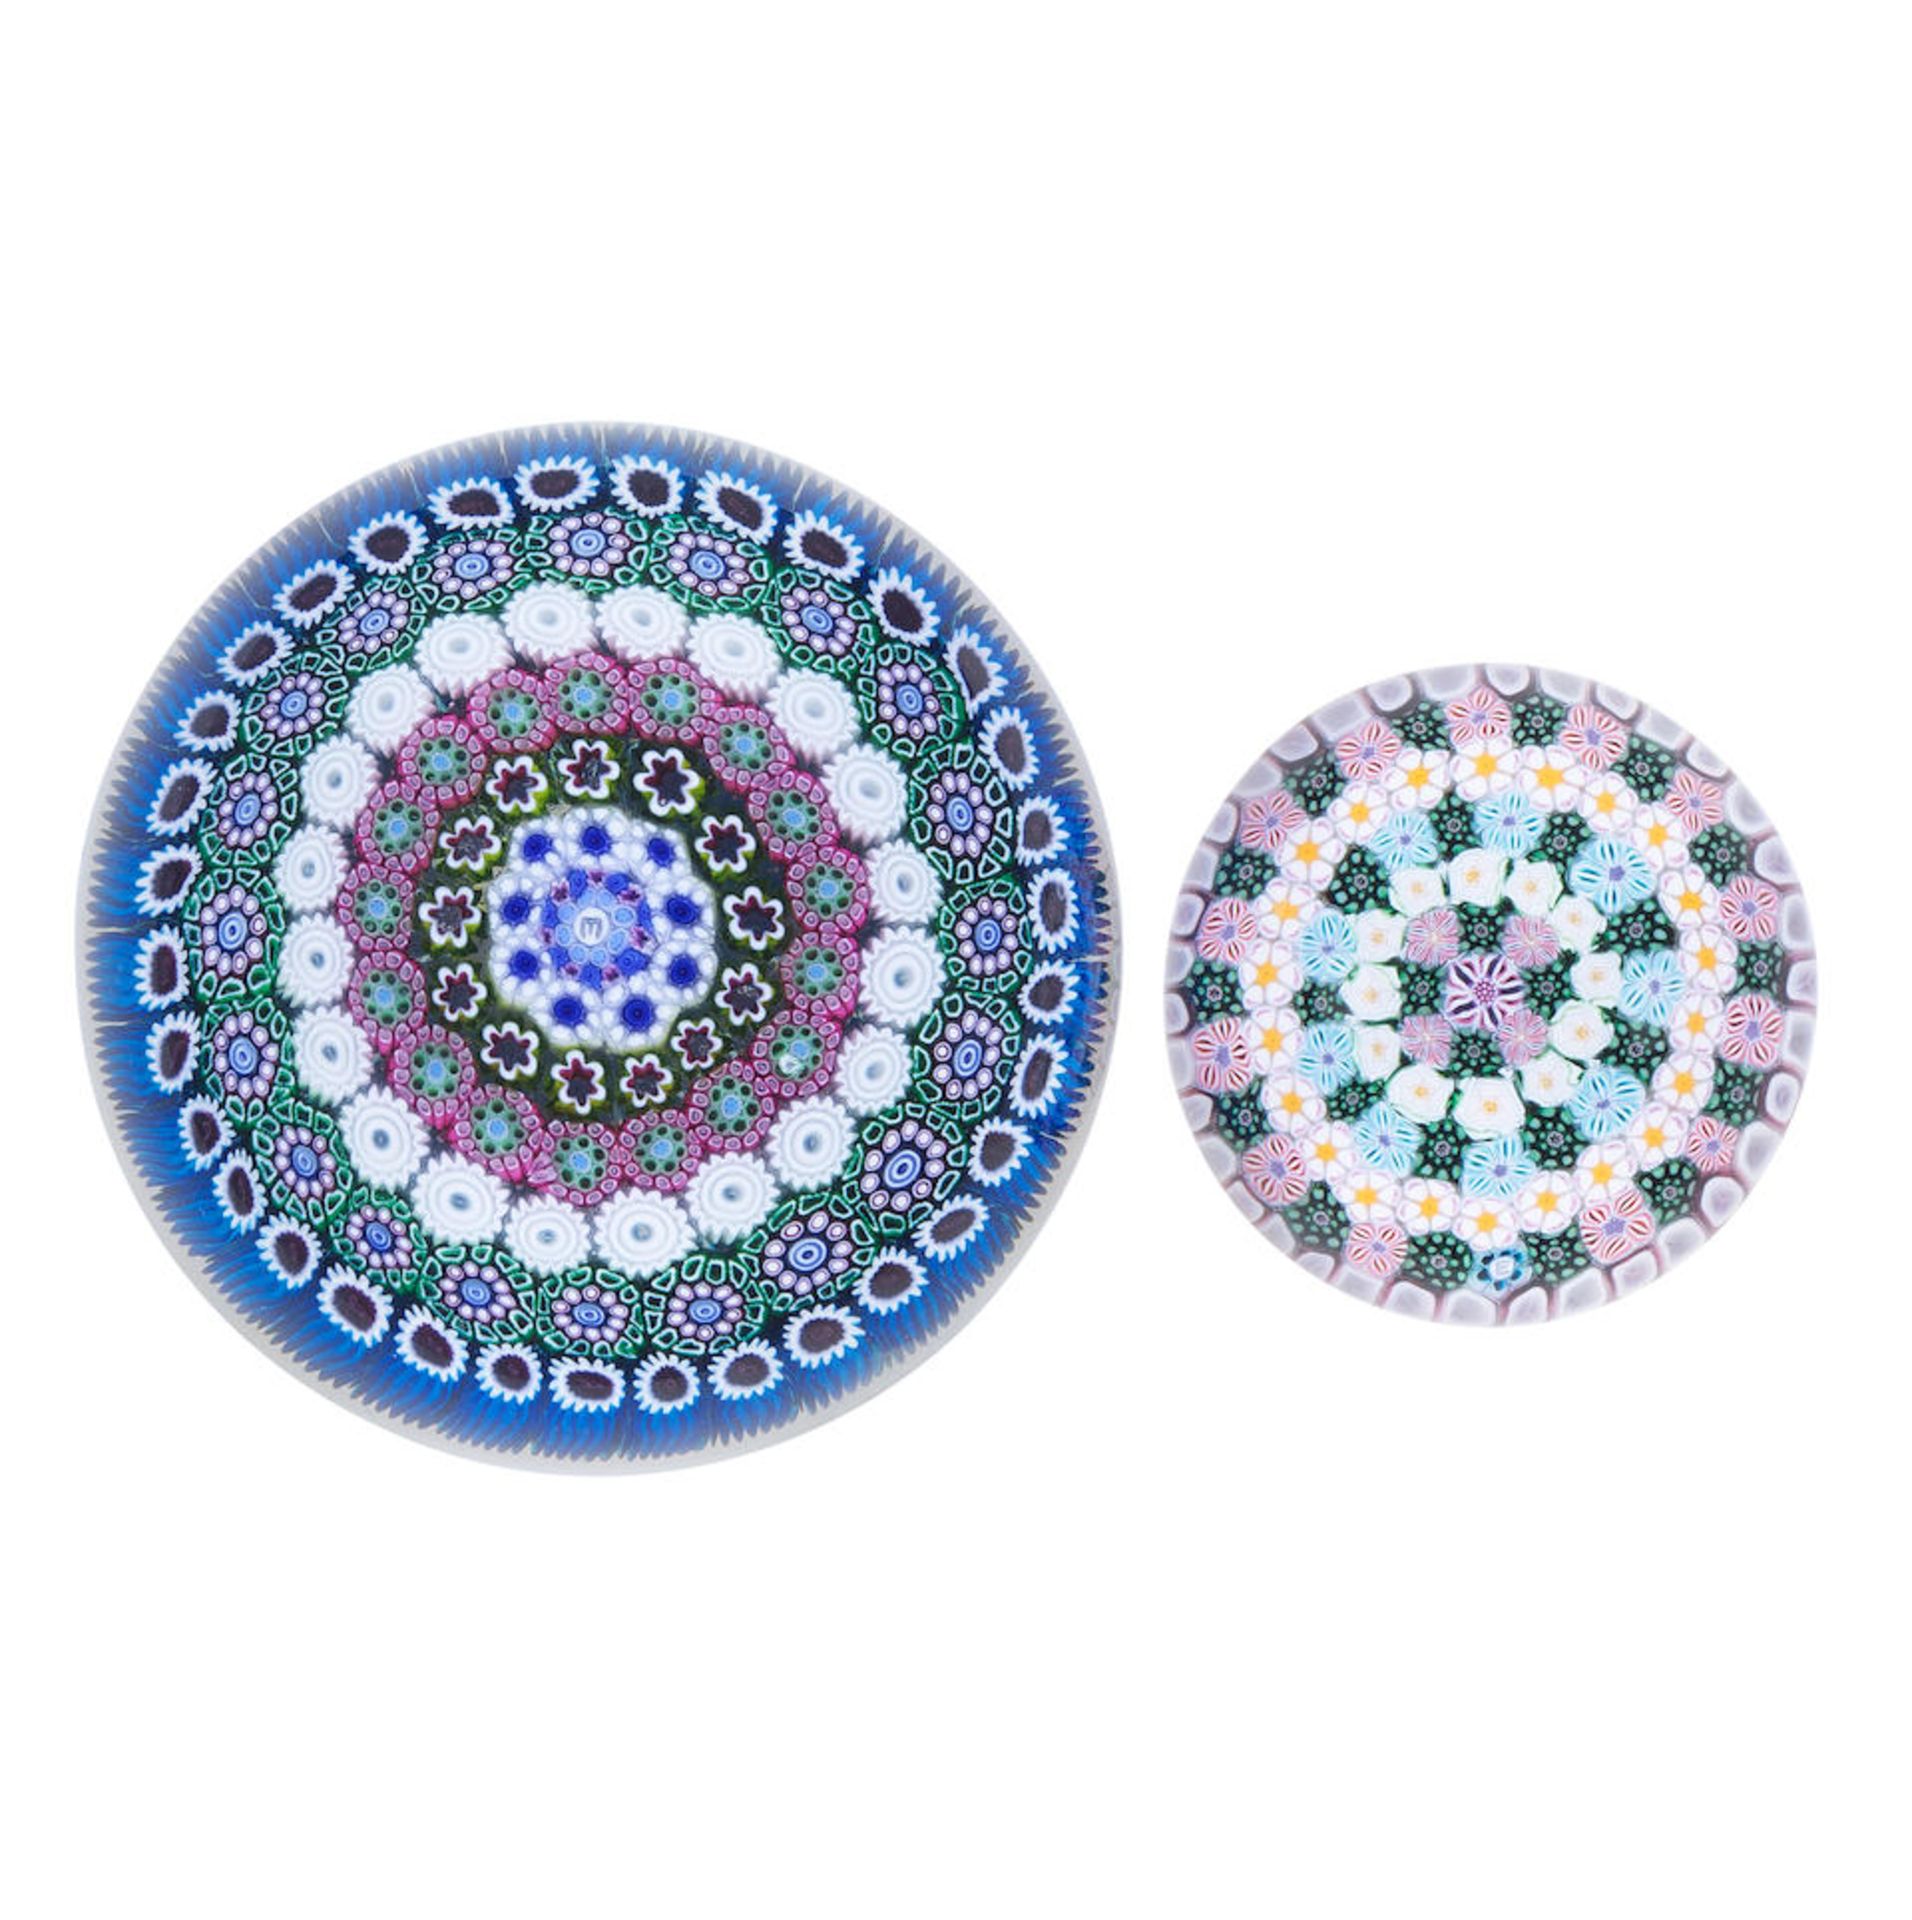 Two Drew Ebelhare concentric millefiori paperweights, dated 2000